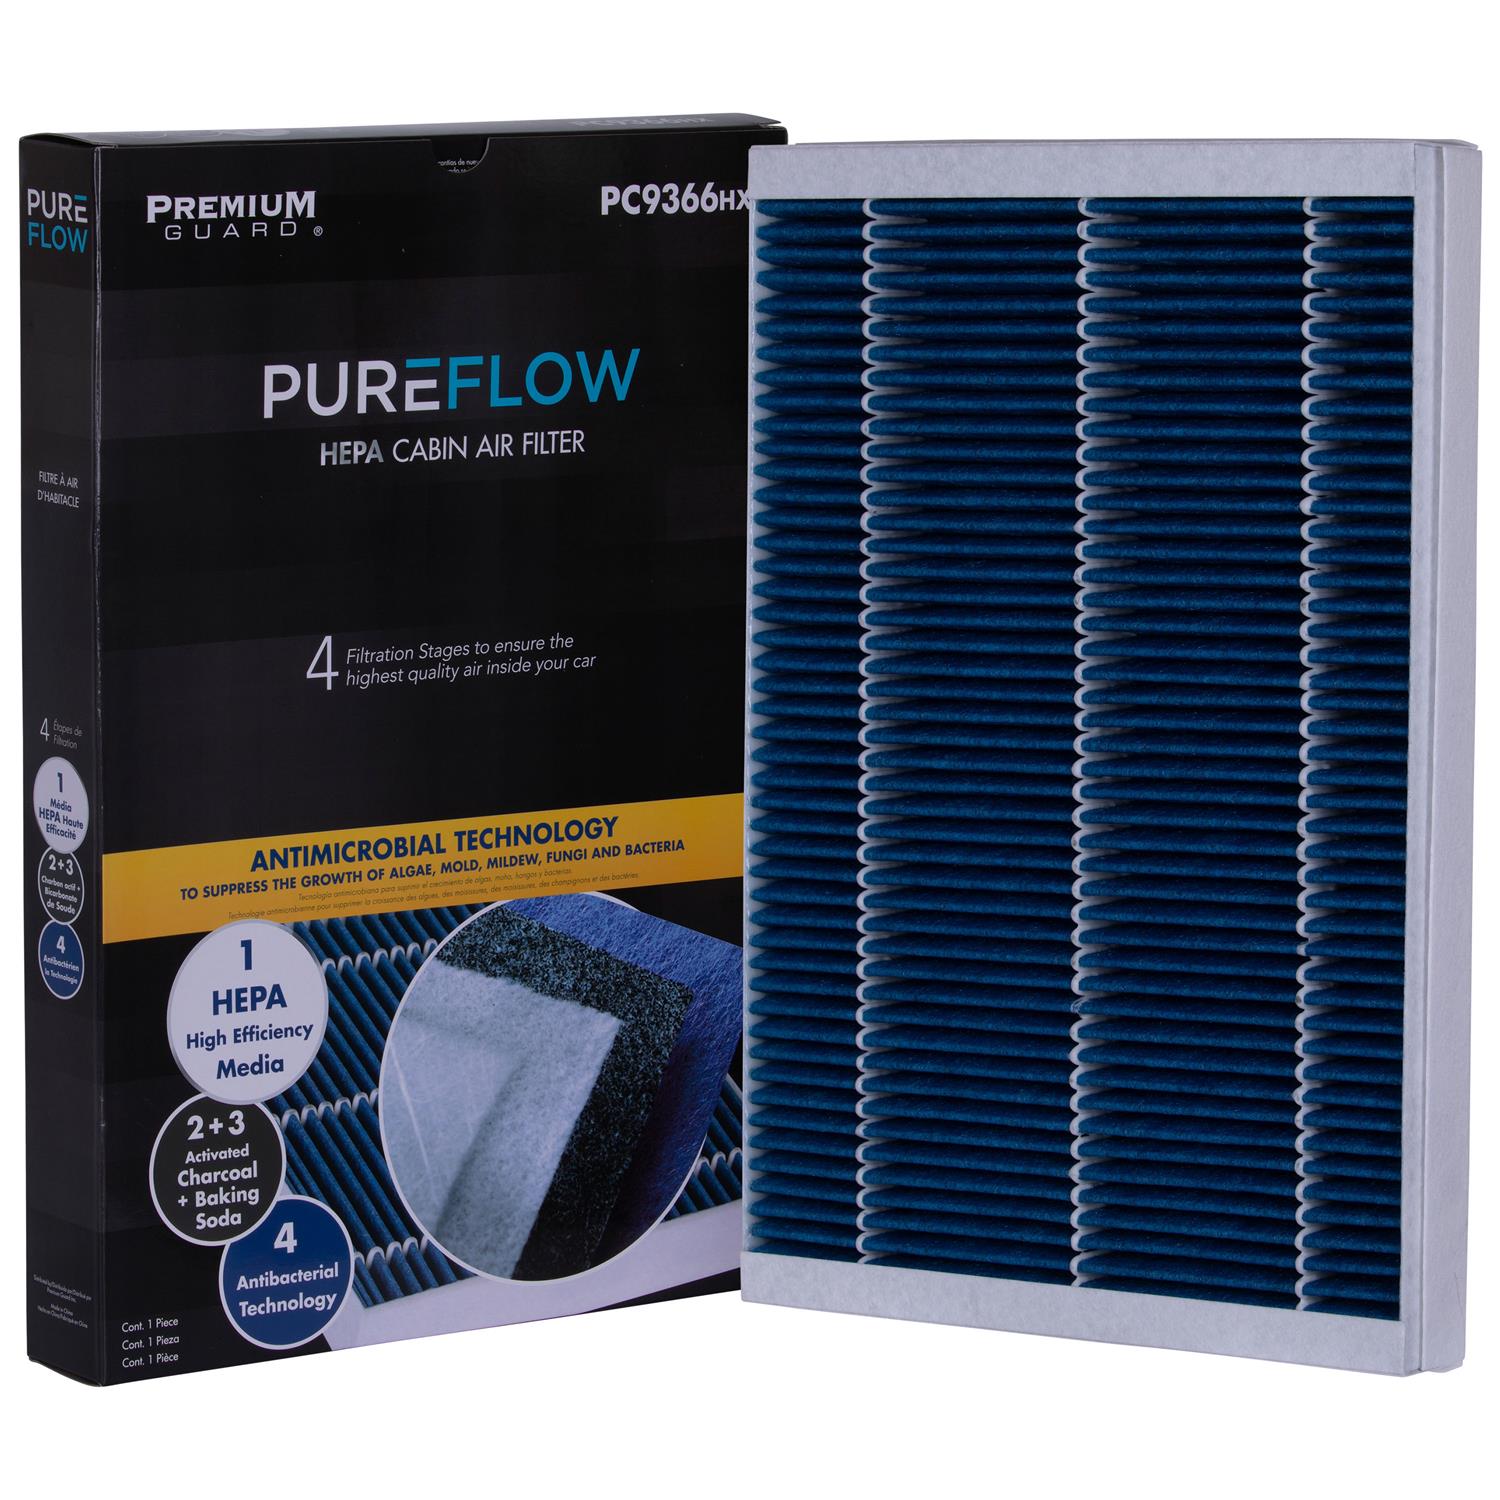 PUREFLOW 2007 Dodge Sprinter 2500 Cabin Air Filter with HEPA and Antibacterial Technology, PC9366HX